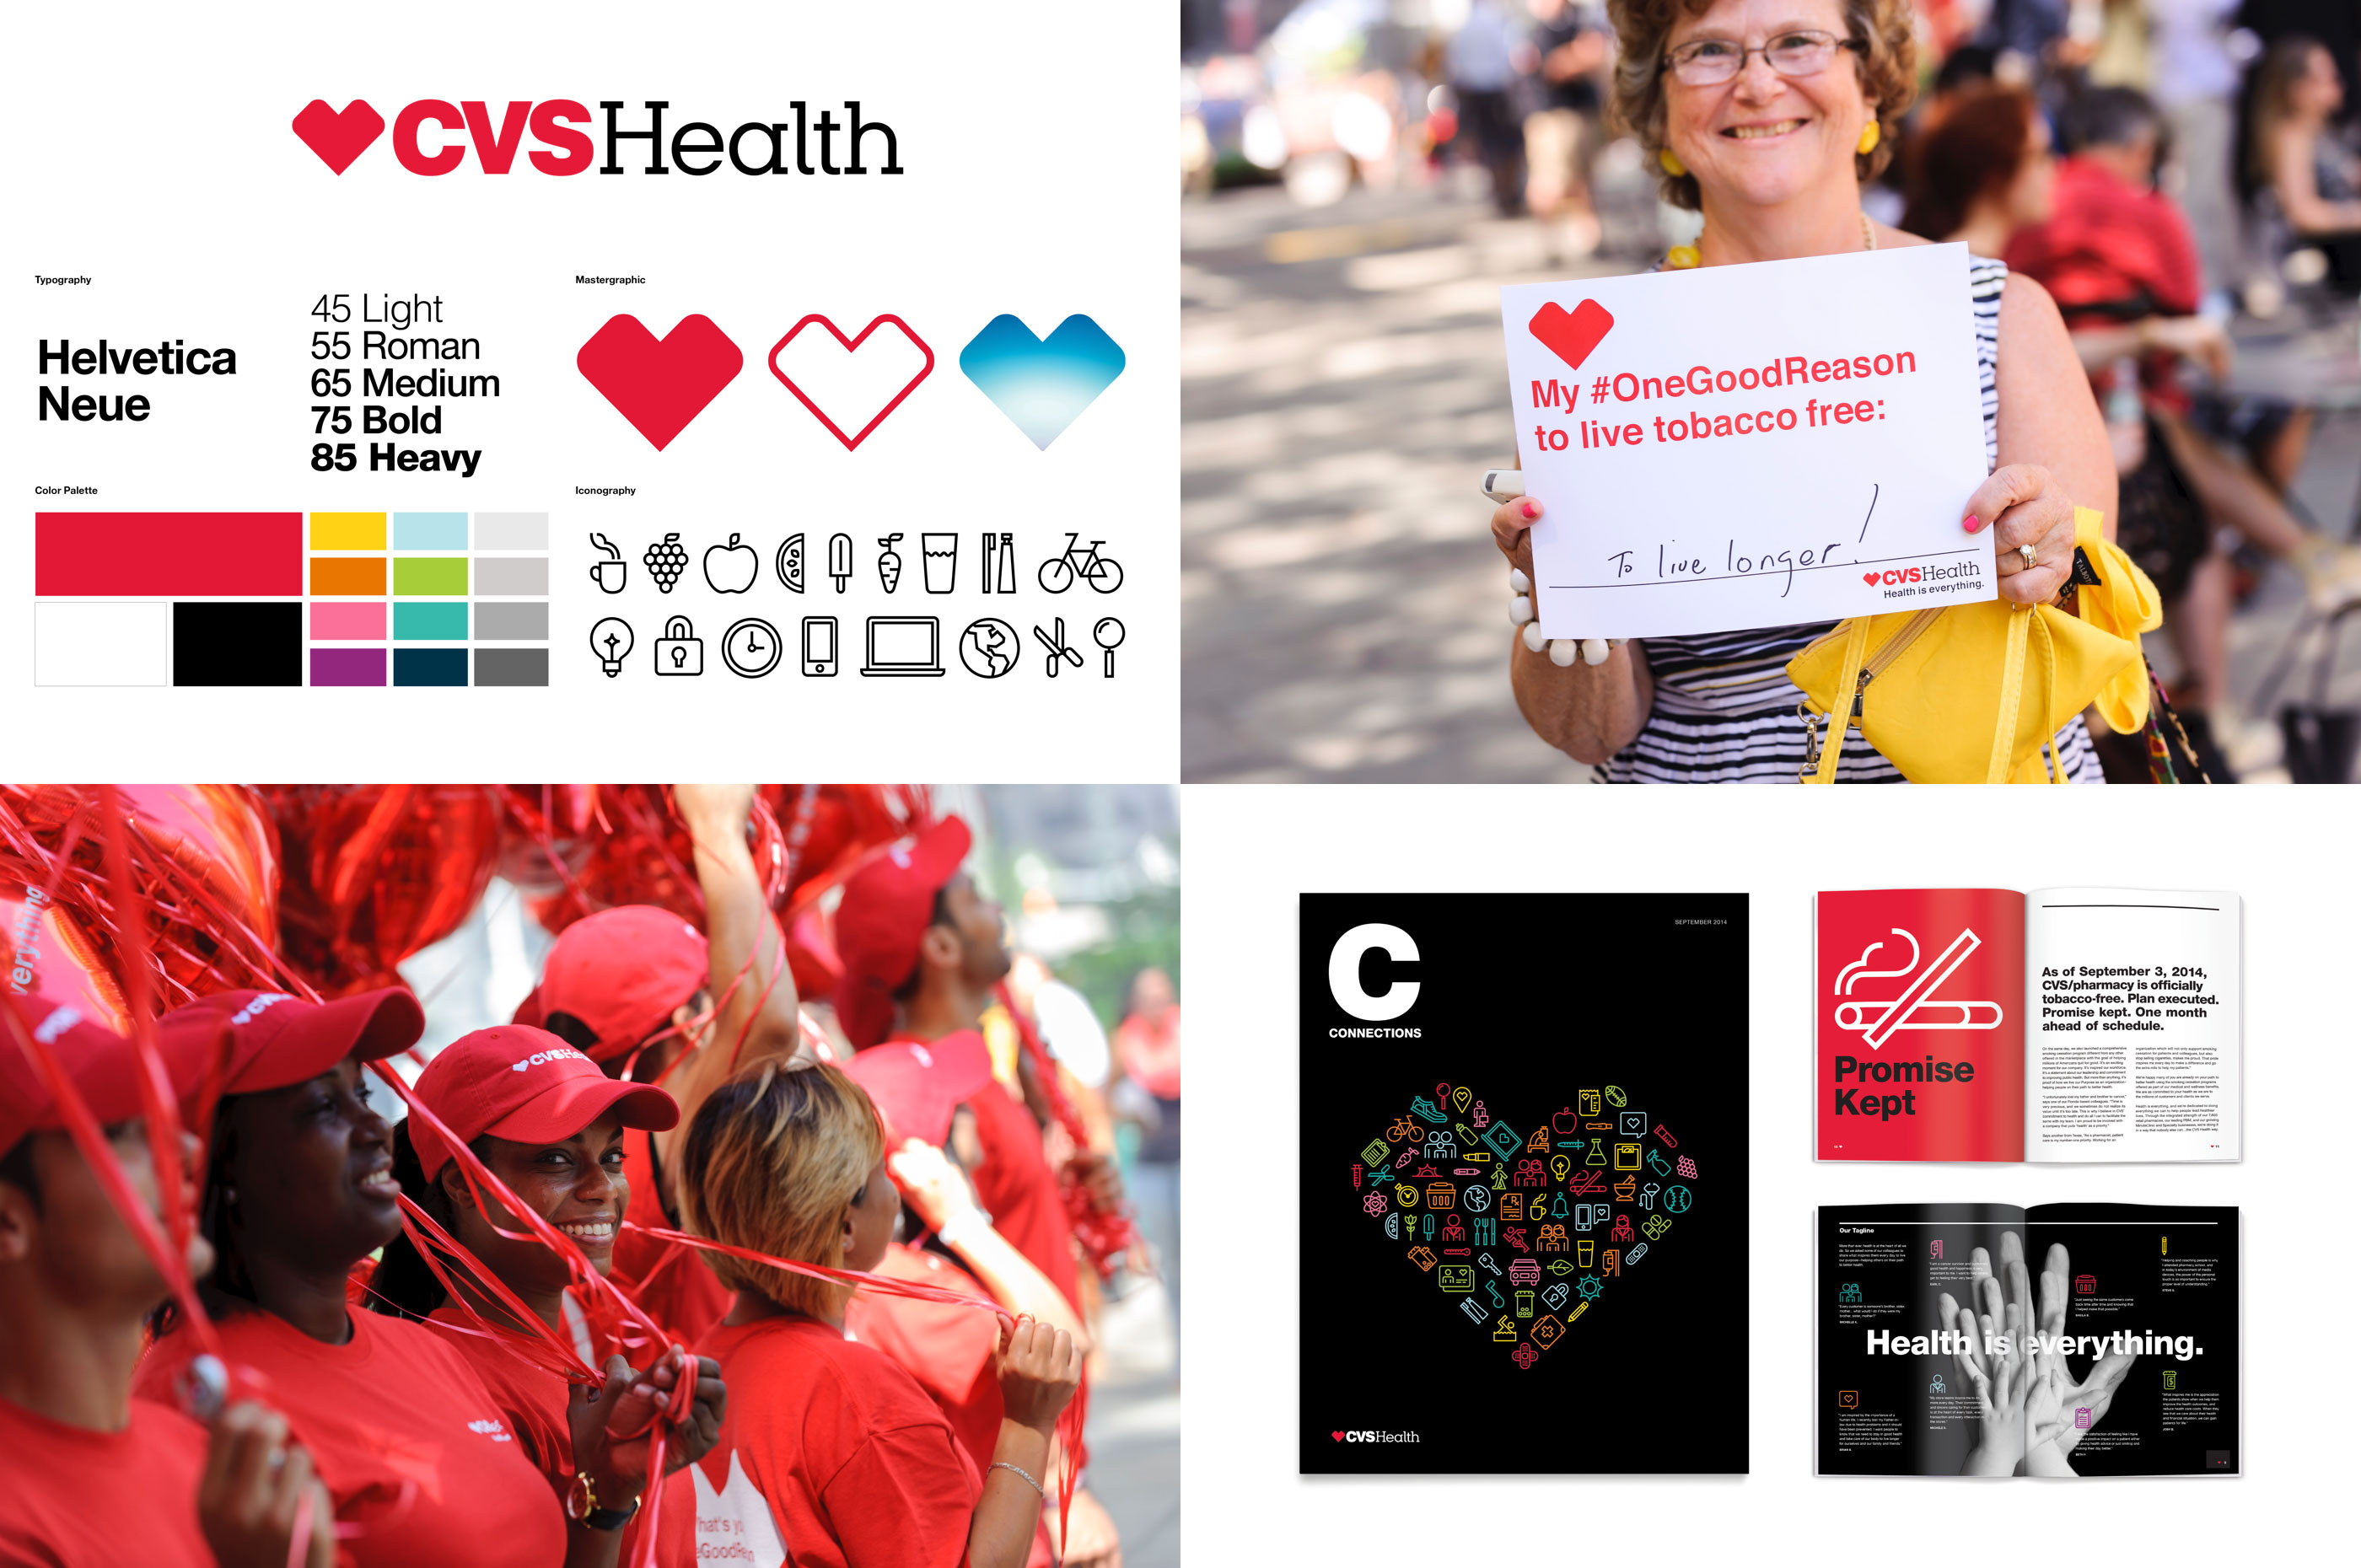 Cvs health vs cvs pharmacy what type of business is carefirst